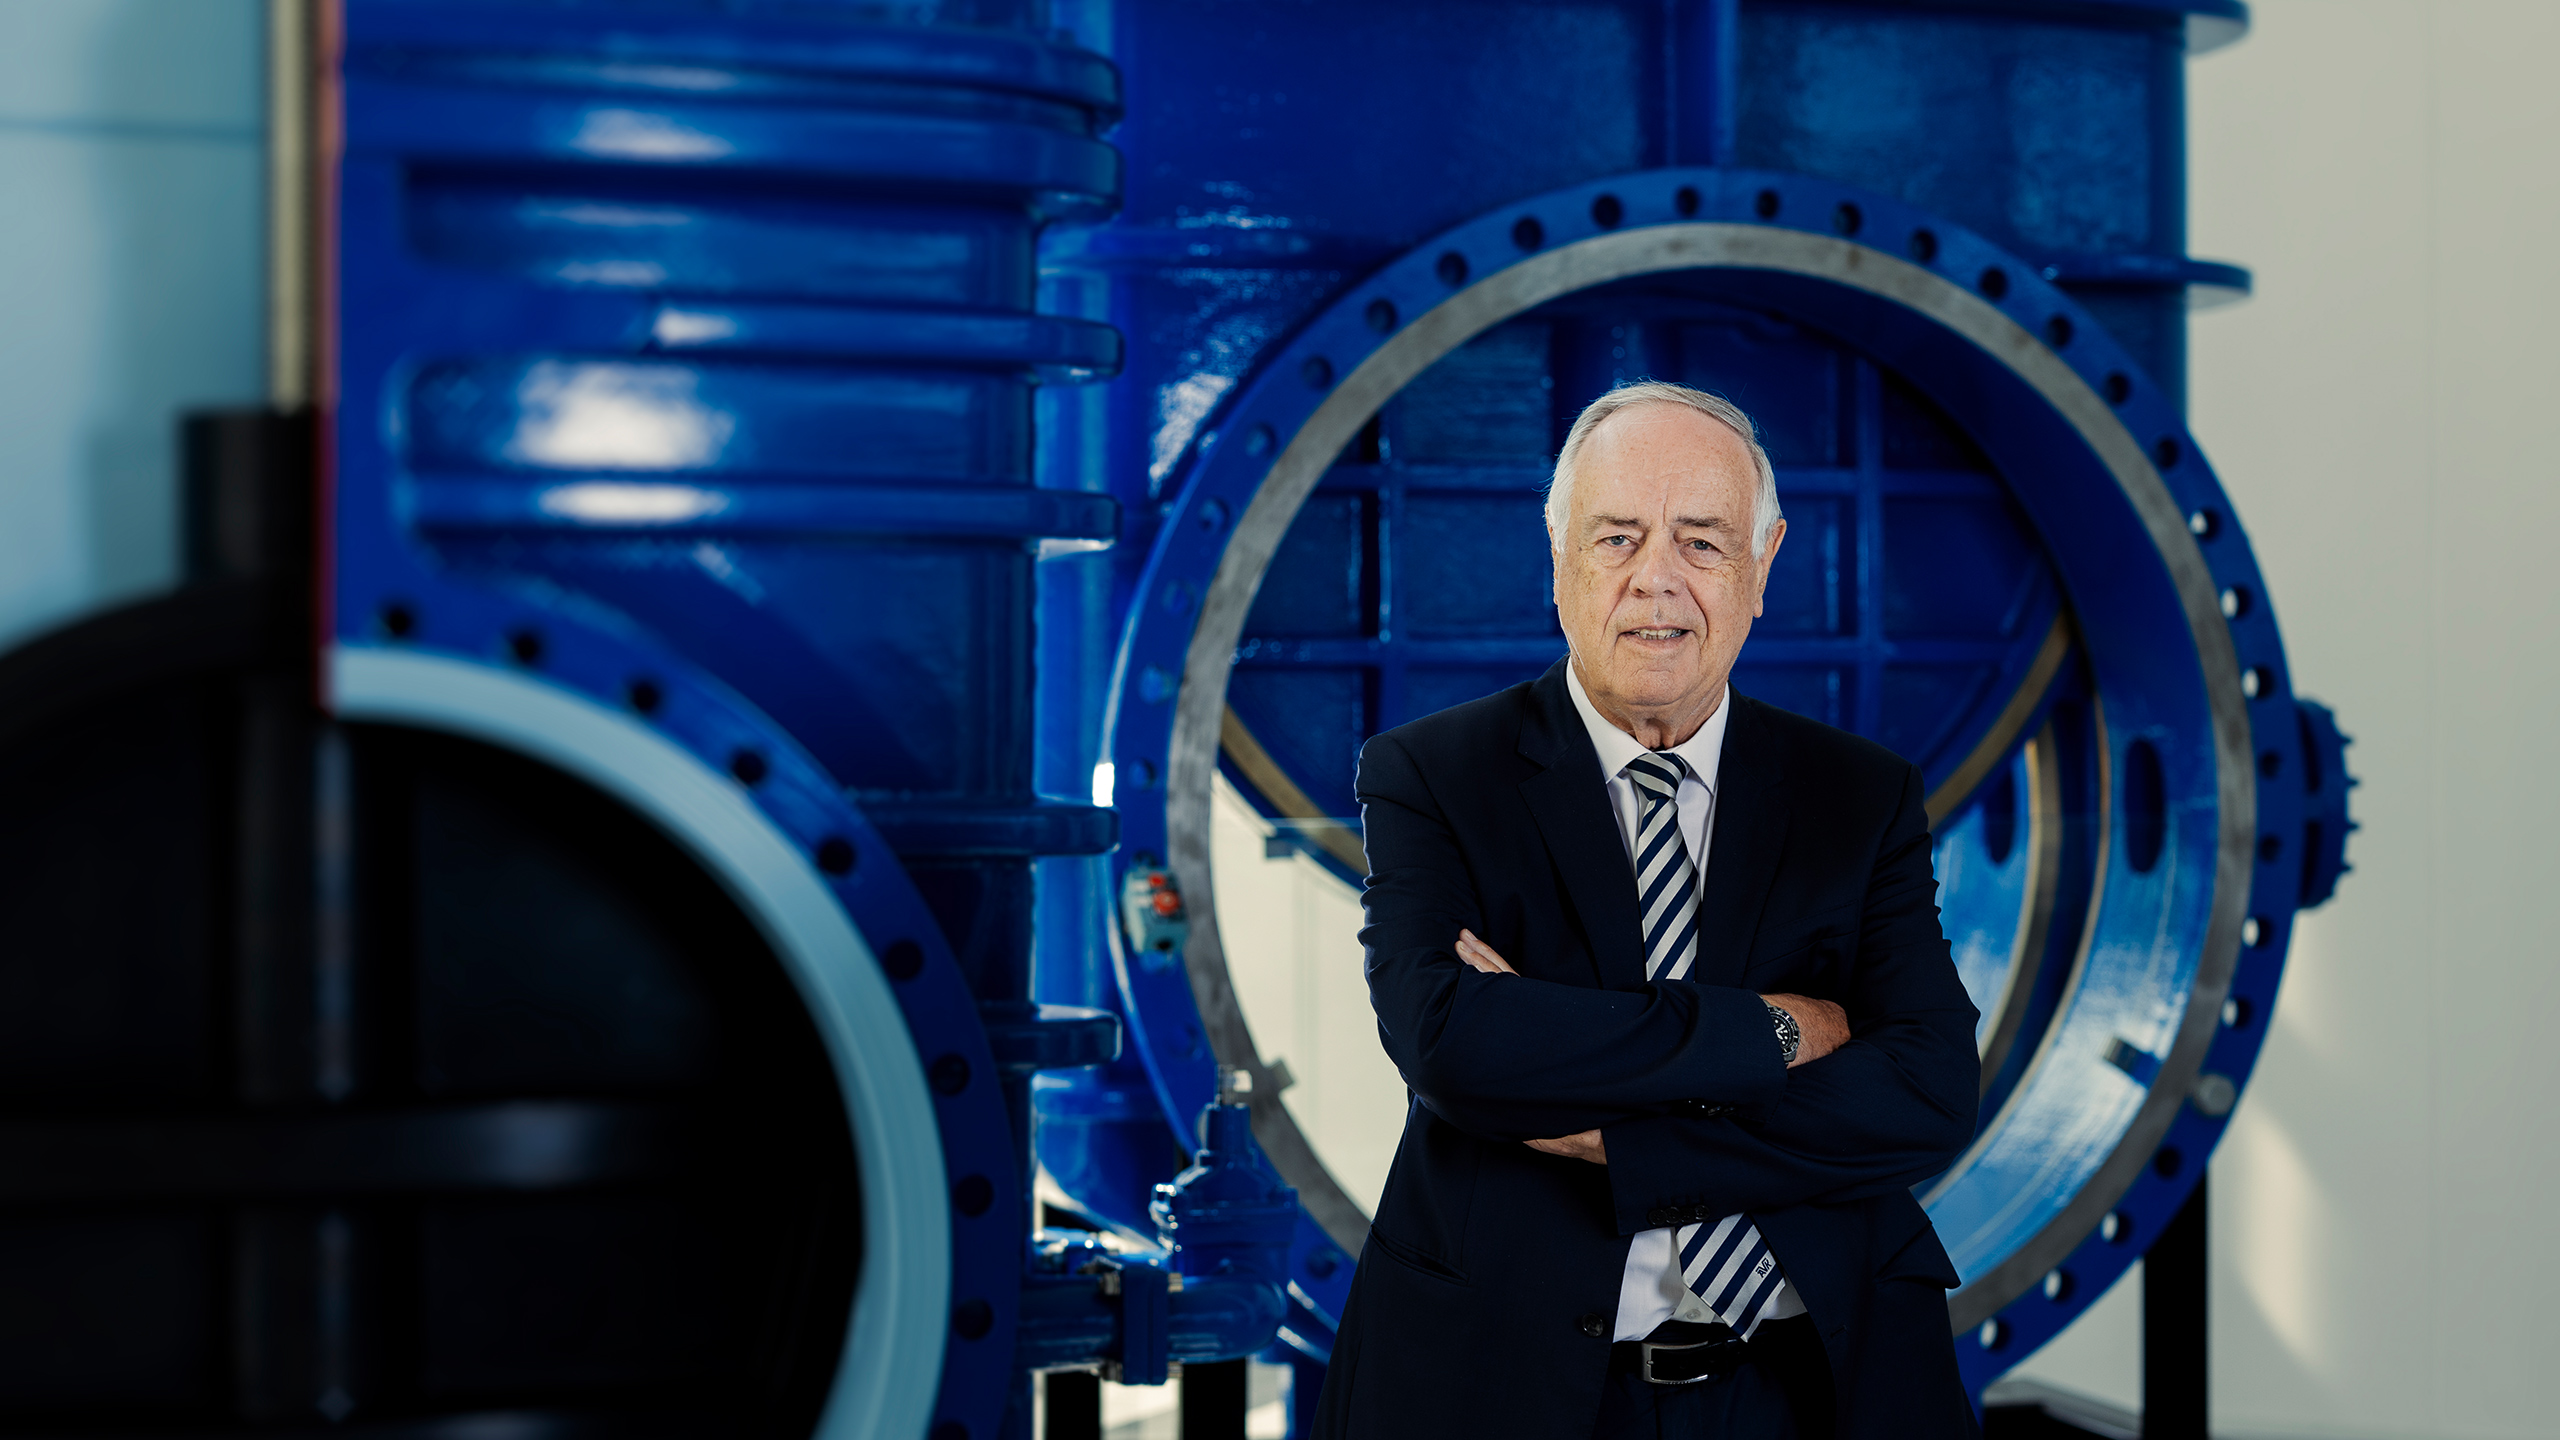 Niels Aage Kjær in front of some of the large-scale valves that have been produced by the Group over the years. NIels Aage Kjær has been CEO of the AVK Group for more than 53 years.